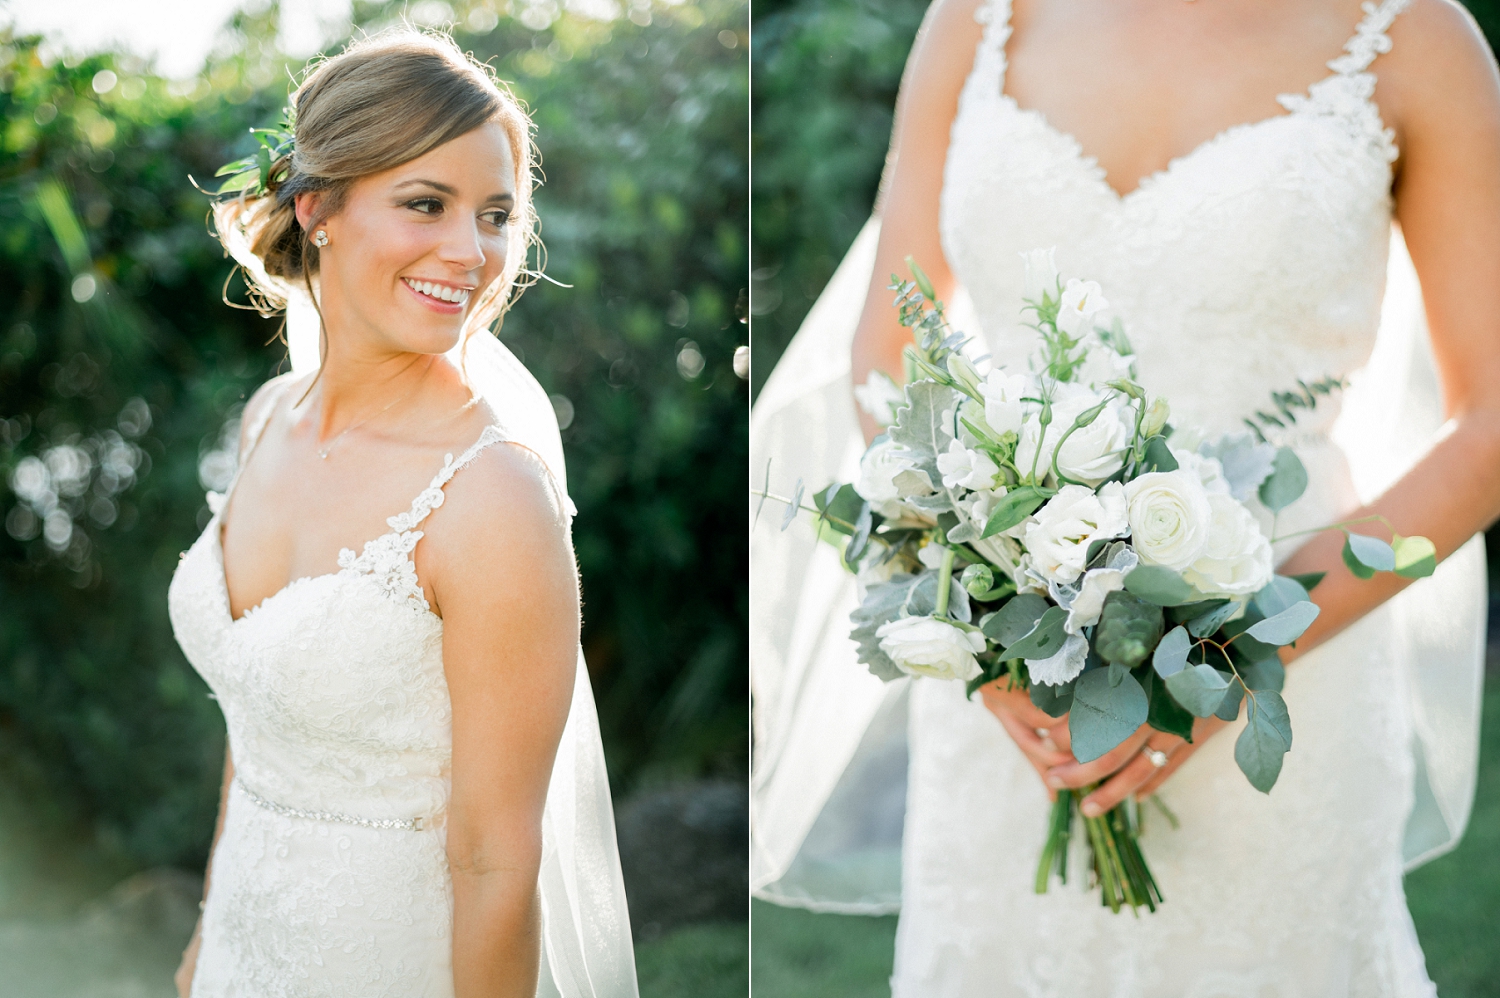 stella york wedding gown, white rose and greenery bouquet, lace wedding gown